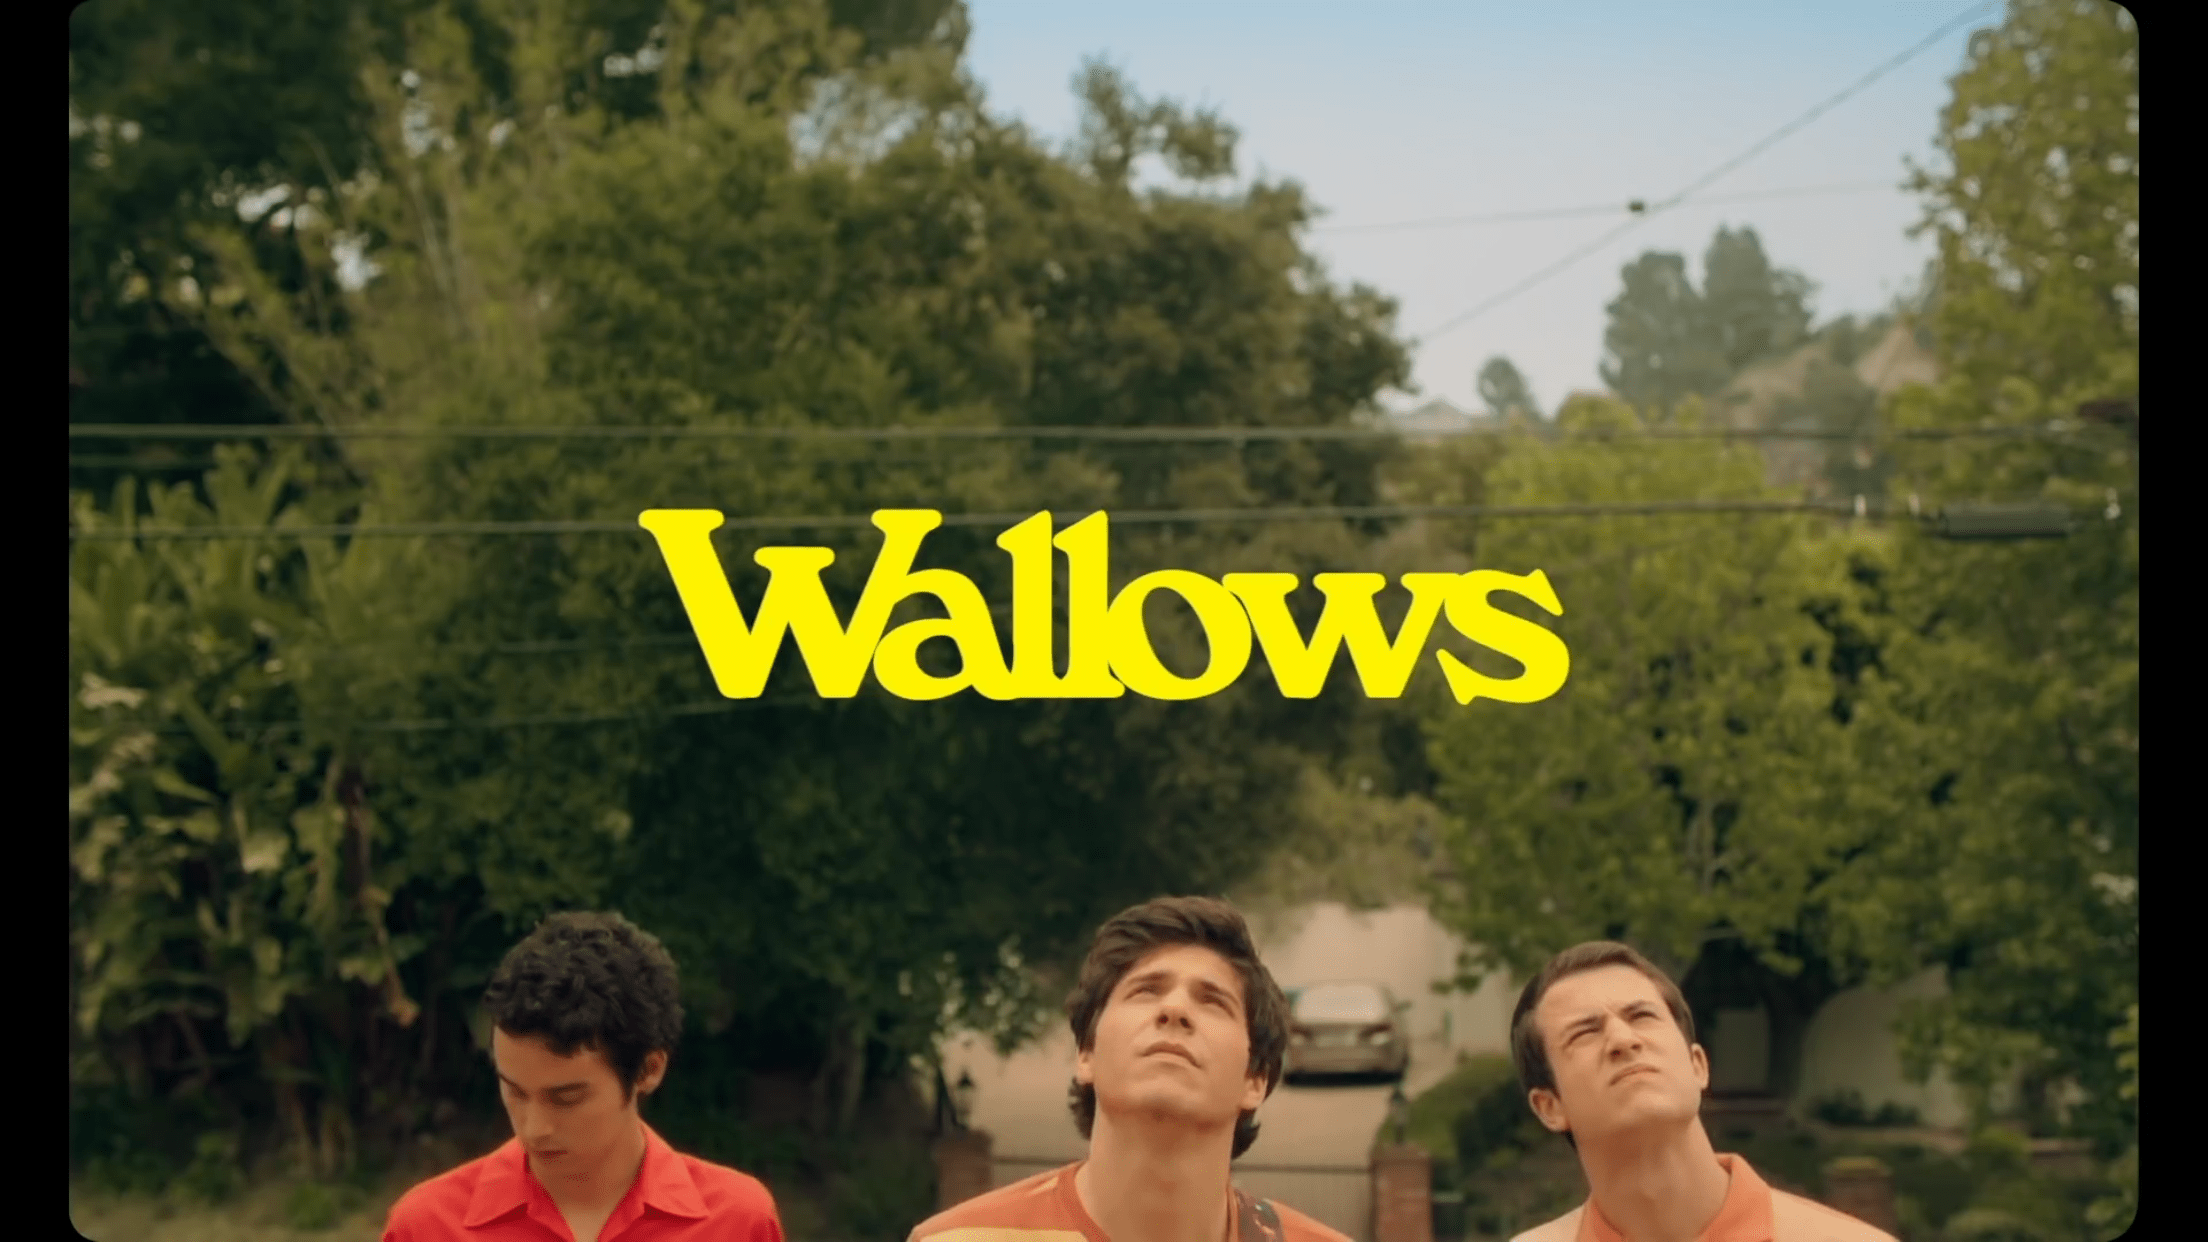 The Wallows Wallpapers  Wallpaper Cave